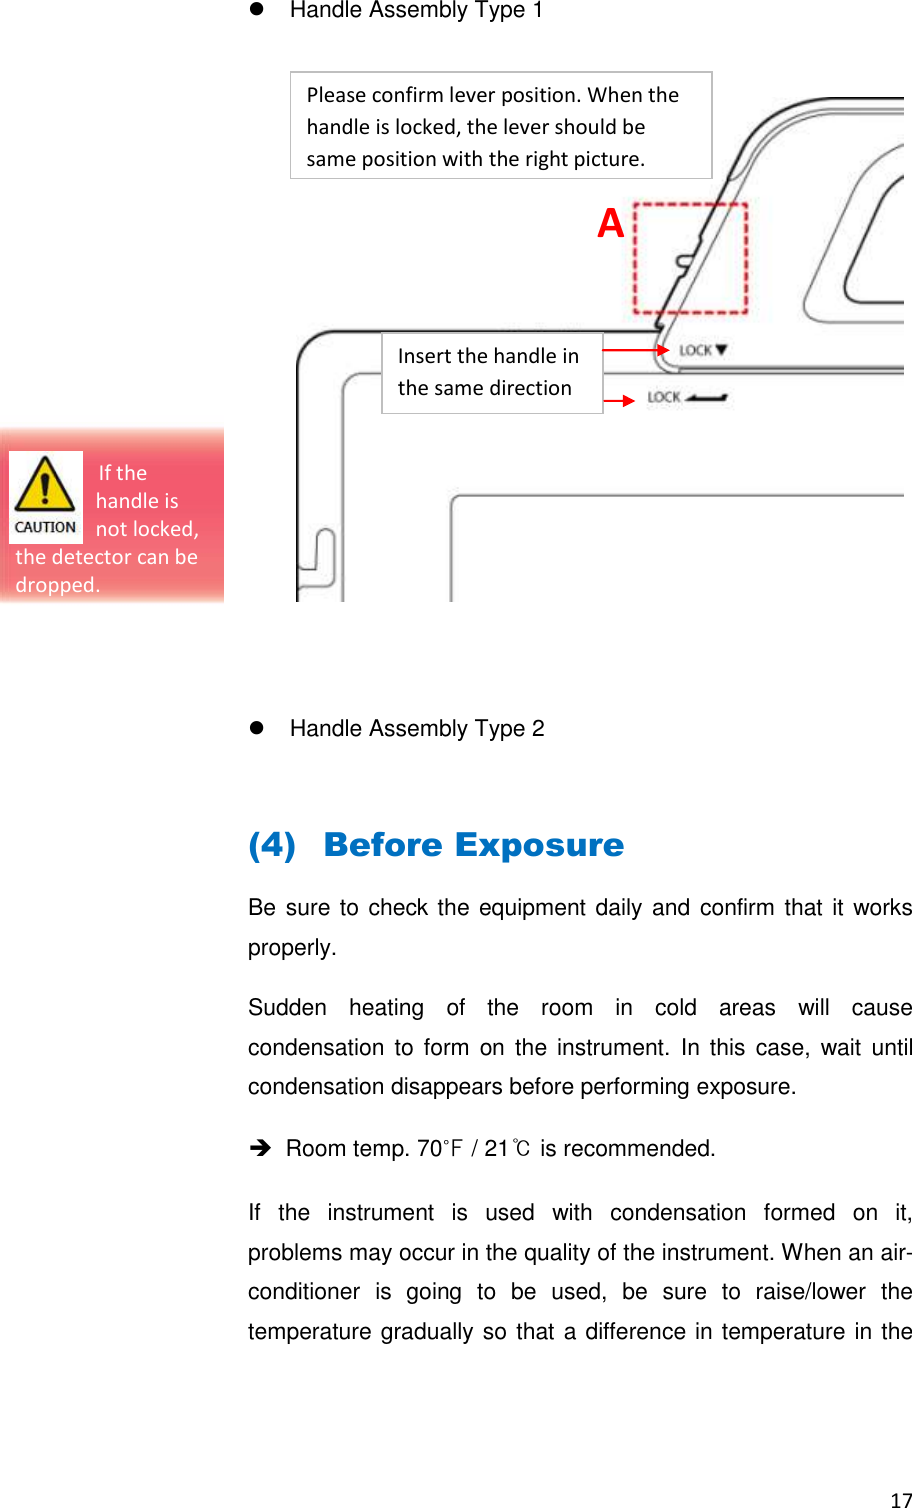 17    Handle Assembly Type 1                    Handle Assembly Type 2  (4) Before Exposure Be sure to check the equipment daily and confirm that it works properly. Sudden  heating  of  the  room  in  cold  areas  will  cause condensation to  form  on  the instrument.  In this  case, wait until condensation disappears before performing exposure.    Room temp. 70℉ / 21℃ is recommended. If  the  instrument  is  used  with  condensation  formed  on  it, problems may occur in the quality of the instrument. When an air-conditioner  is  going  to  be  used,  be  sure  to  raise/lower  the temperature gradually so that a difference in temperature in the Insert the handle in the same direction A                                  If the  handle is  not locked, the detector can be dropped. Please confirm lever position. When the handle is locked, the lever should be same position with the right picture.   